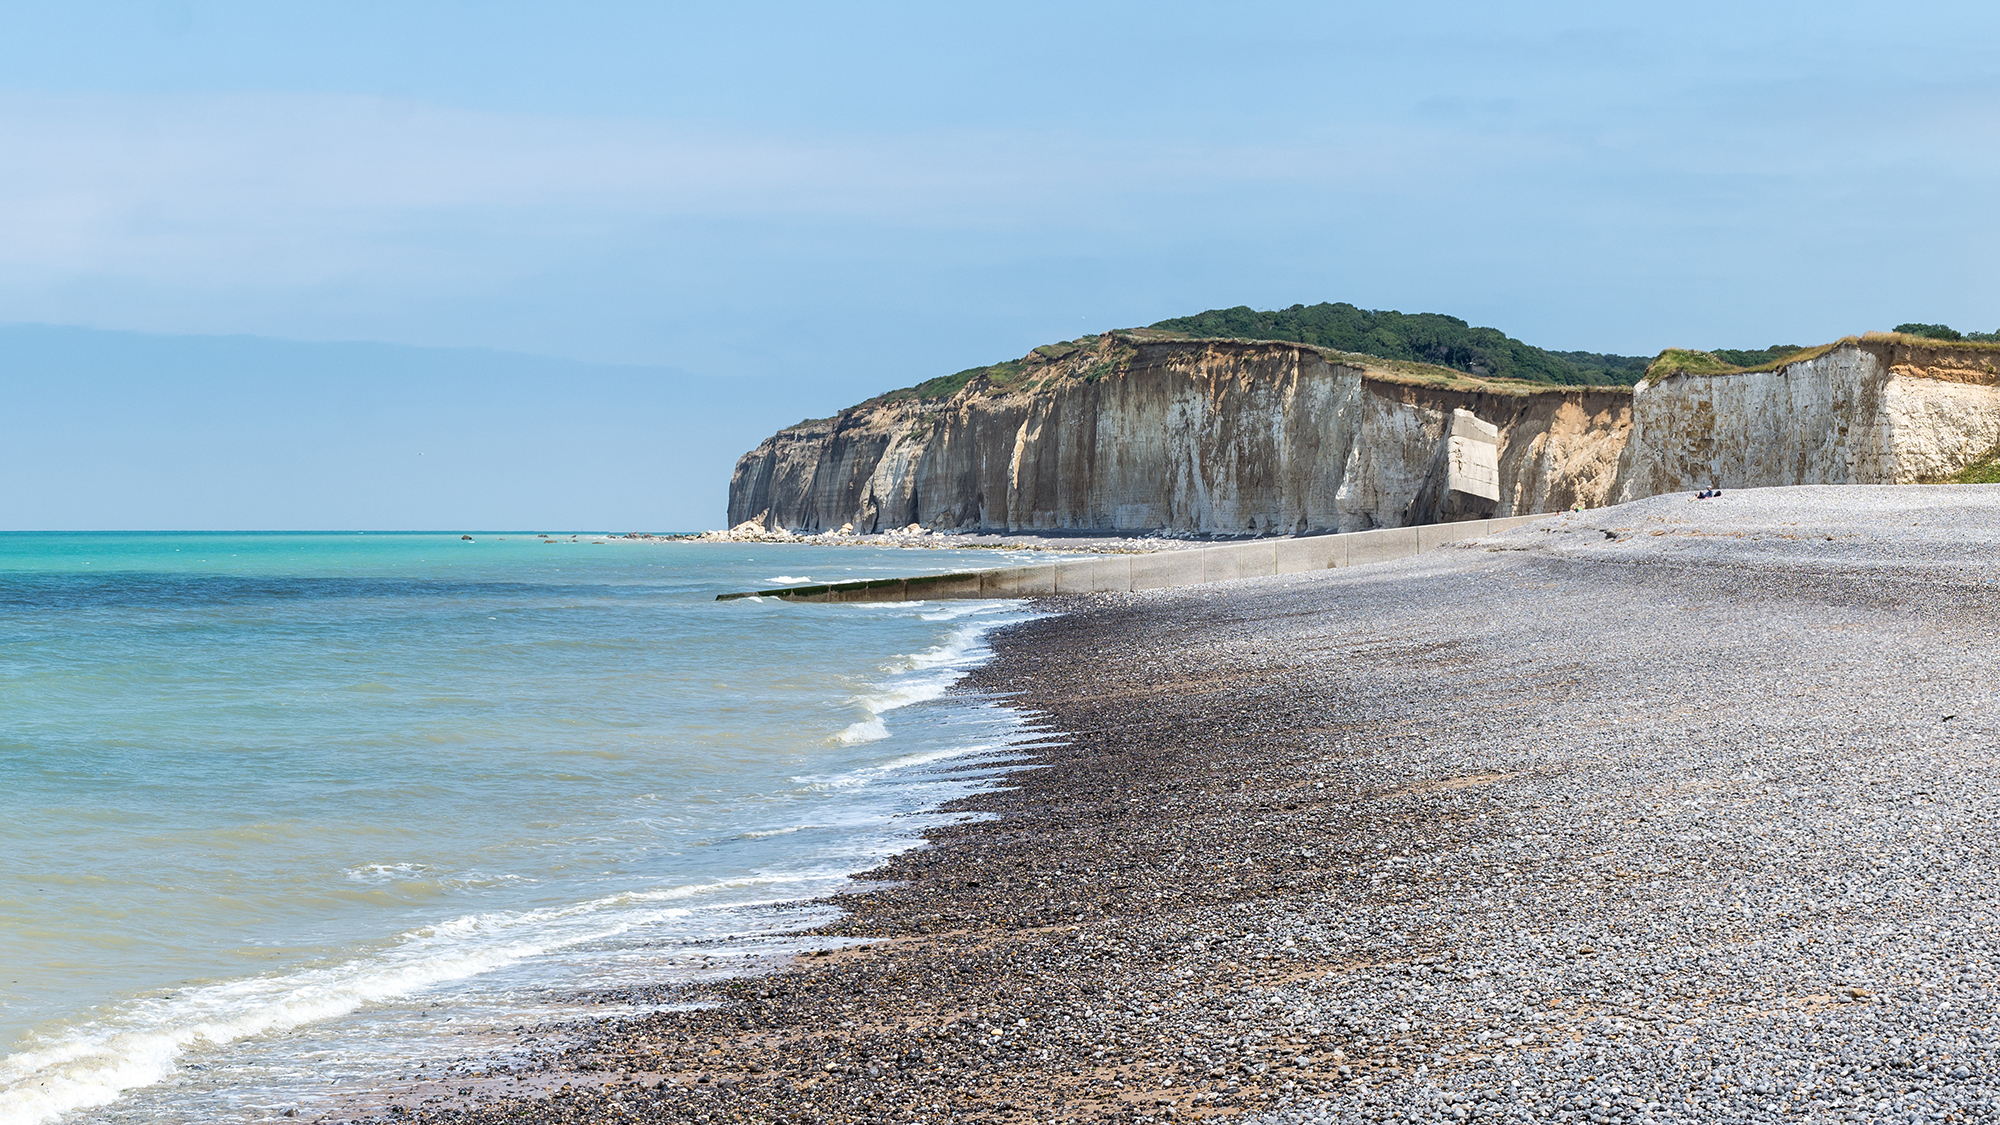 Normandy pebbled beach with clear blue waves washing onto the shore with green cliff tops in the background